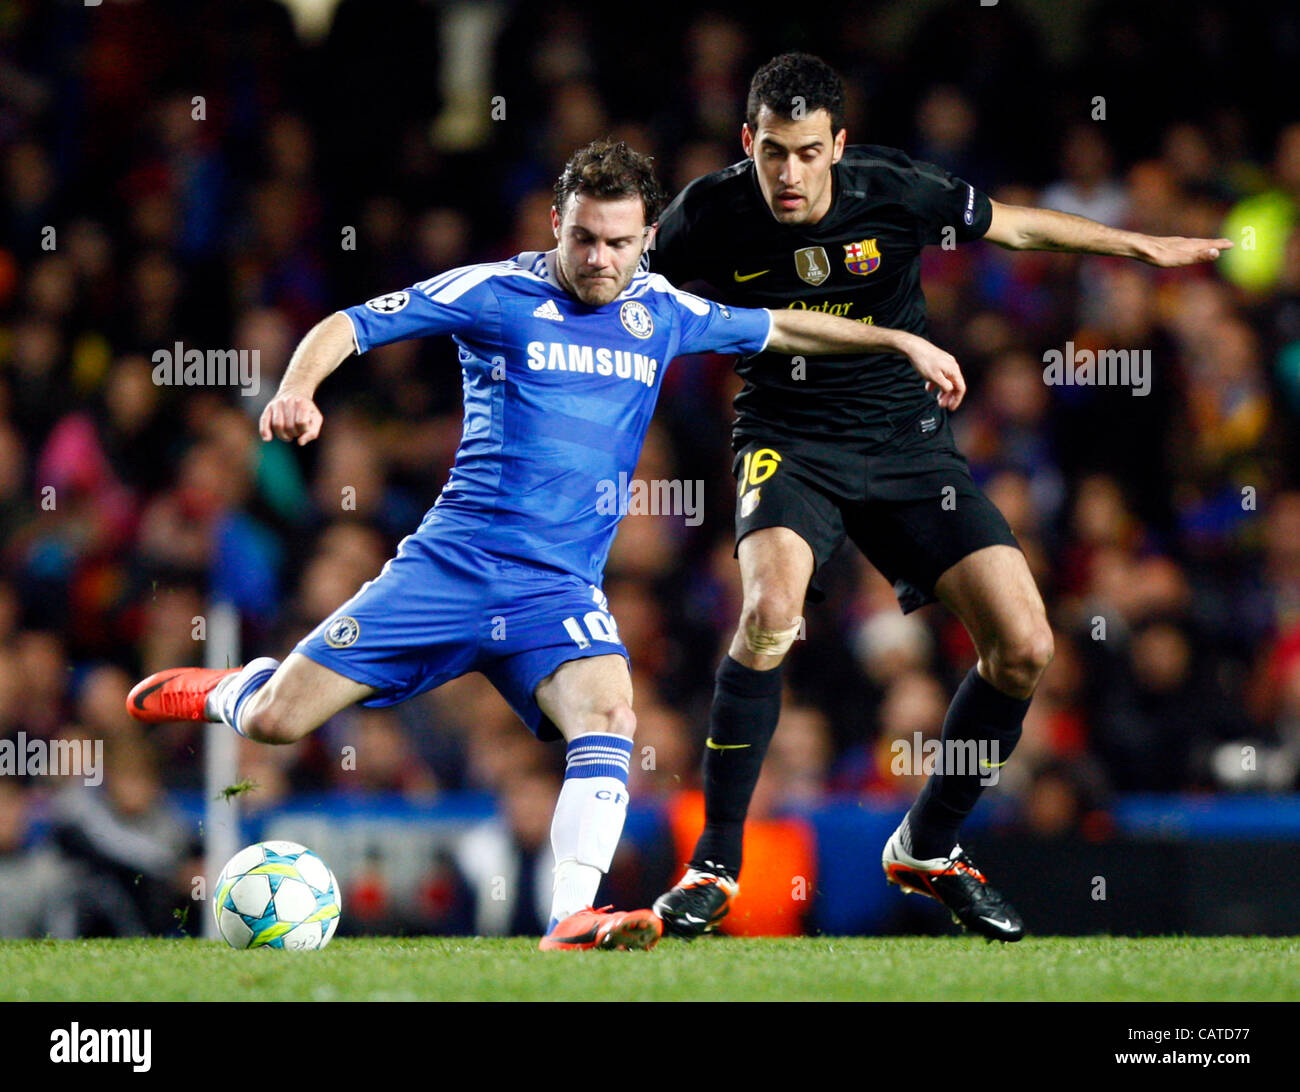 07.11.2012. London, England. Henrikh Mkhitaryan of FC Shakhtar Donetsk in  action during the UEFA Champions League Group E game between Chelsea and  Shakhtar Donetsk from Stamford Bridge Stock Photo - Alamy